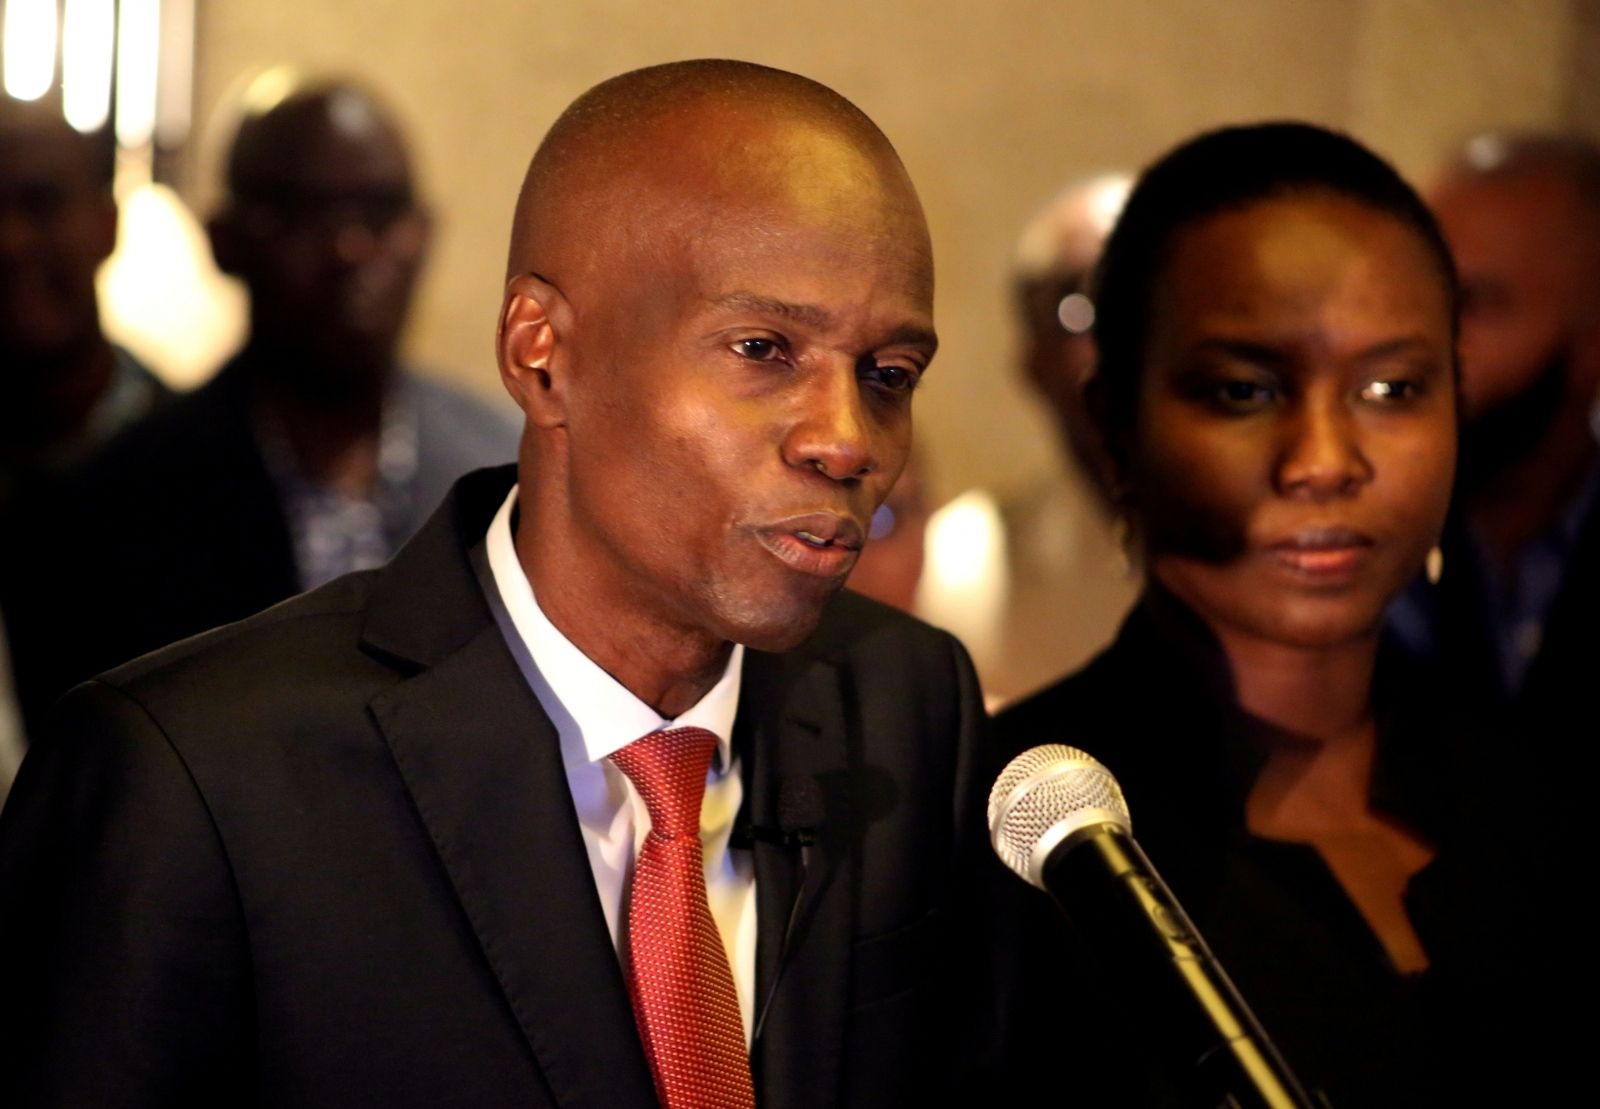 FILE PHOTO: Jovenel Moise addresses the media next to his wife Martine after winning Haiti's 2016 presidential election FILE PHOTO: Jovenel Moise addresses the media next to his wife Martine after winning the 2016 presidential election, in Port-au-Prince, Haiti. Picture taken November 28, 2016. REUTERS/Jeanty Junior Augustin/File Photo Jeanty Junior Agustin